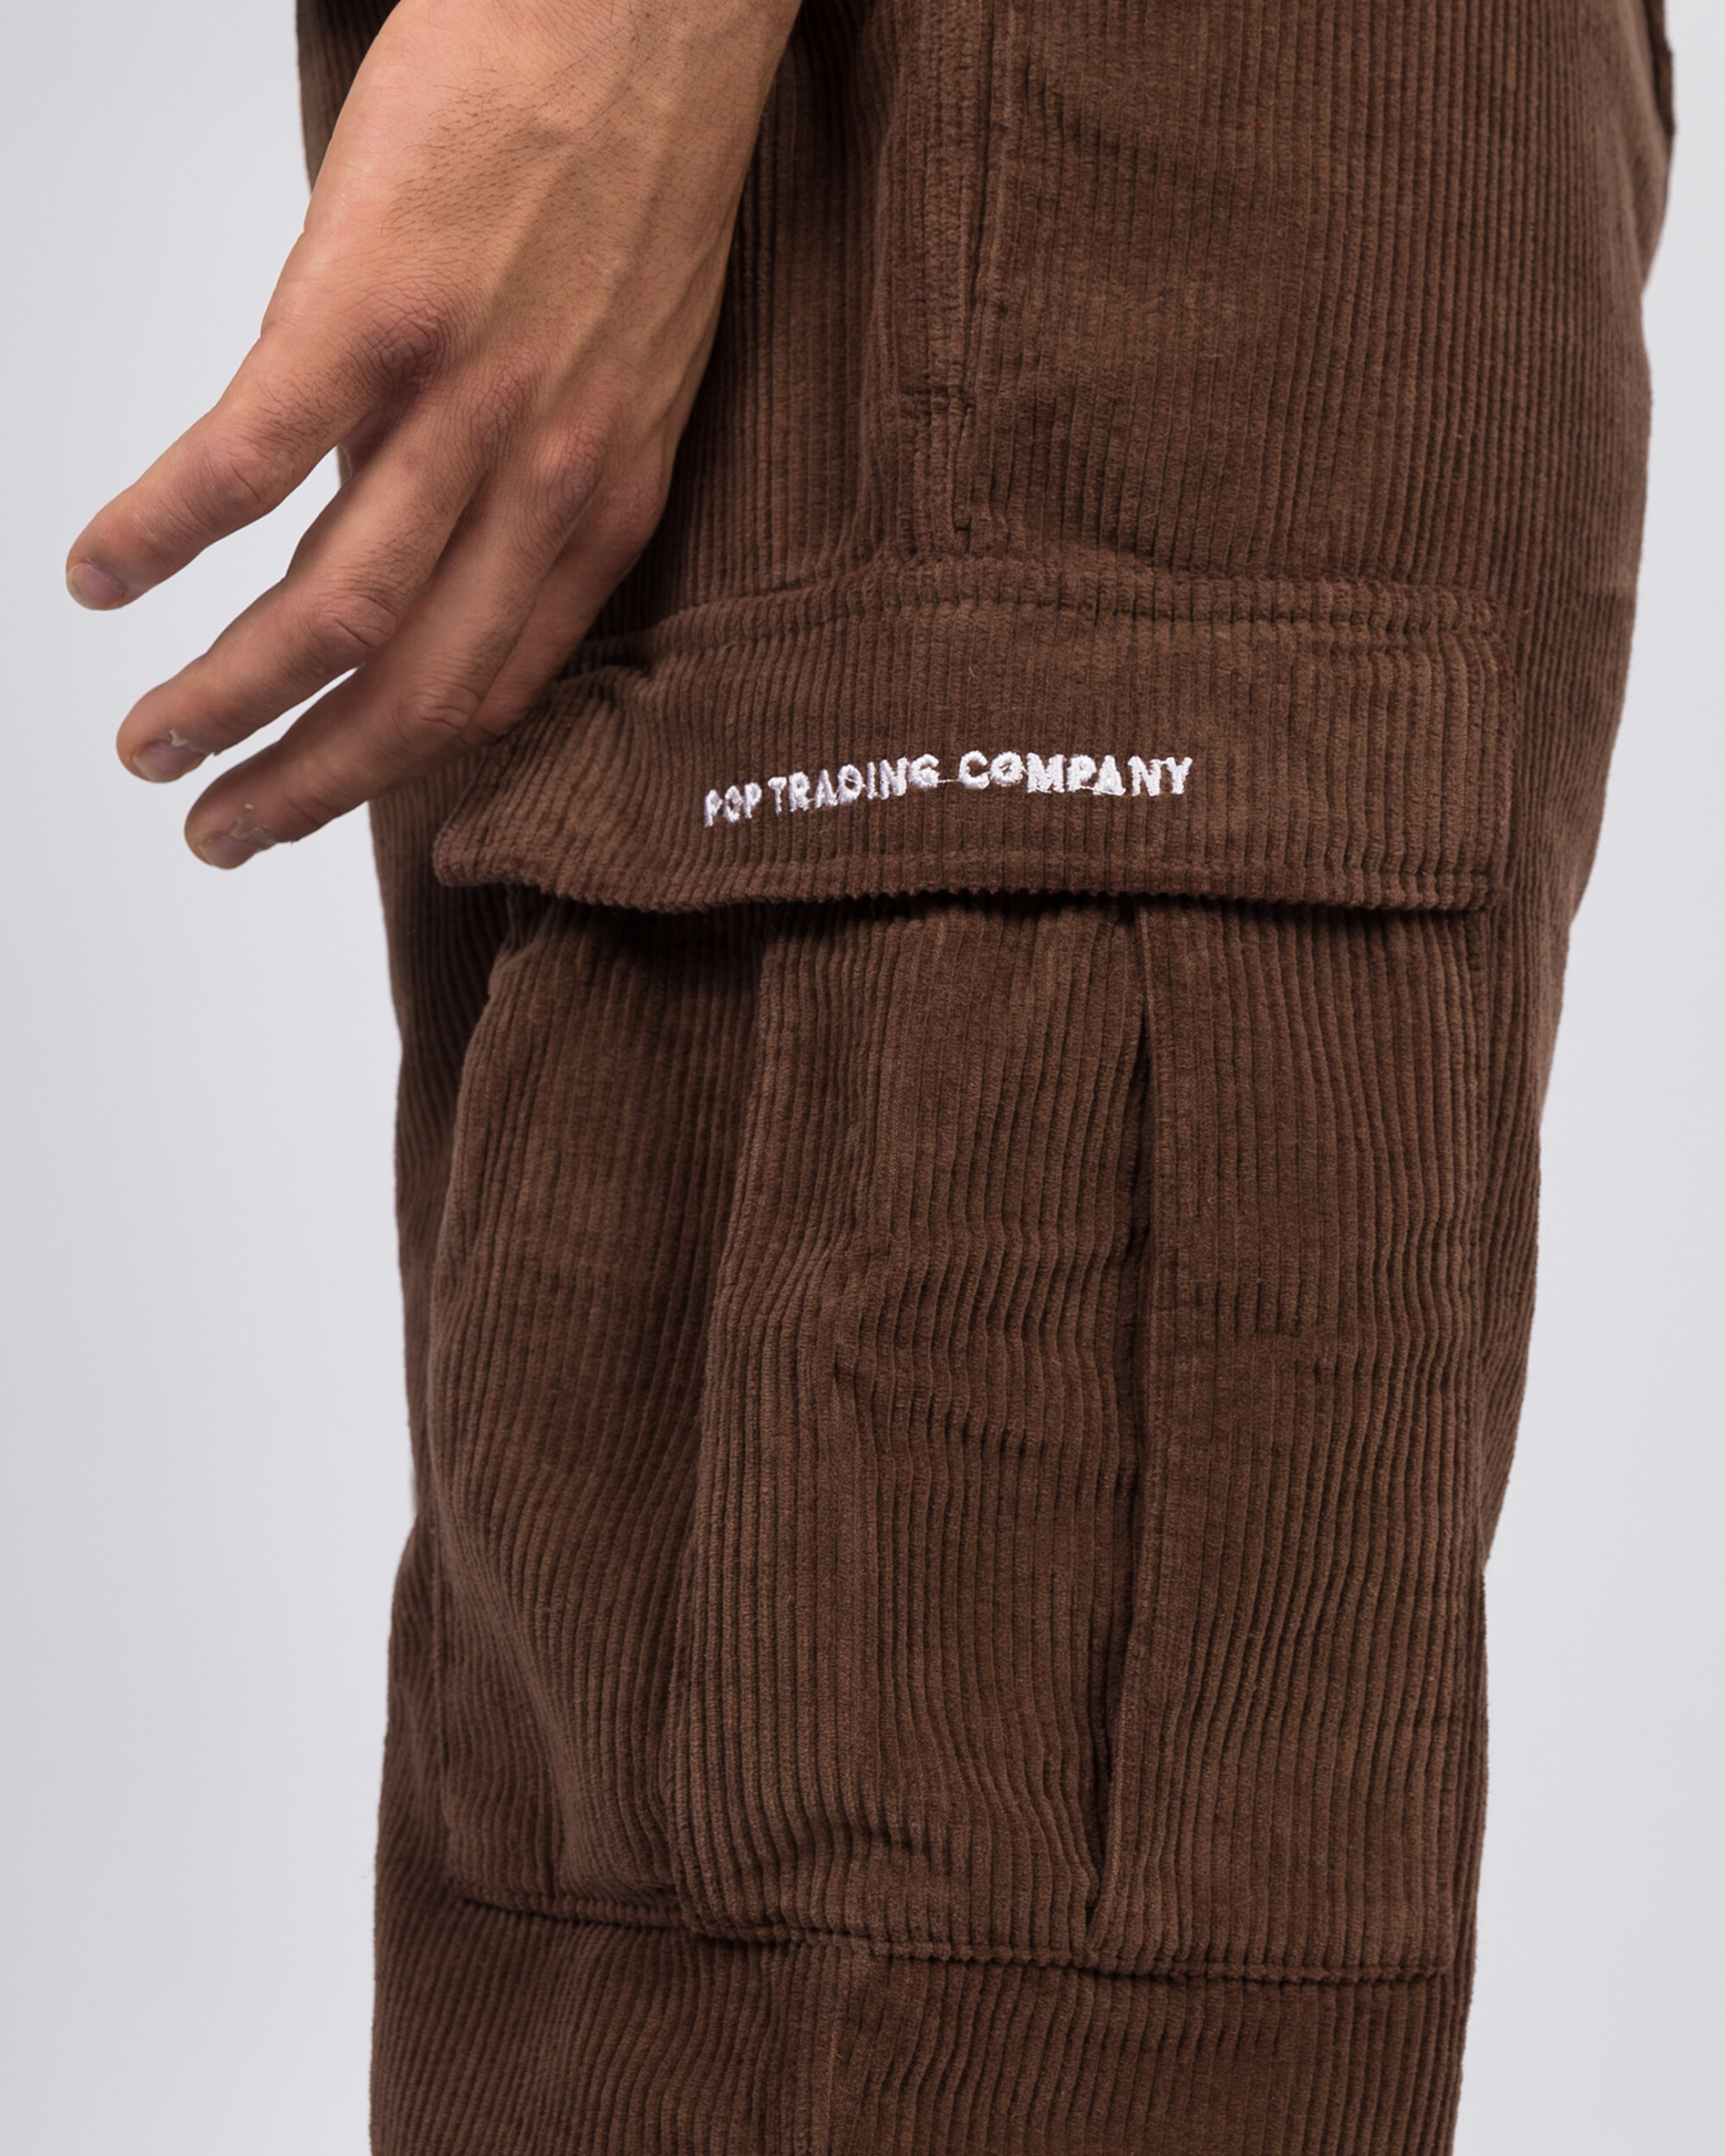 Pop Trading Co cord cargo pants brown